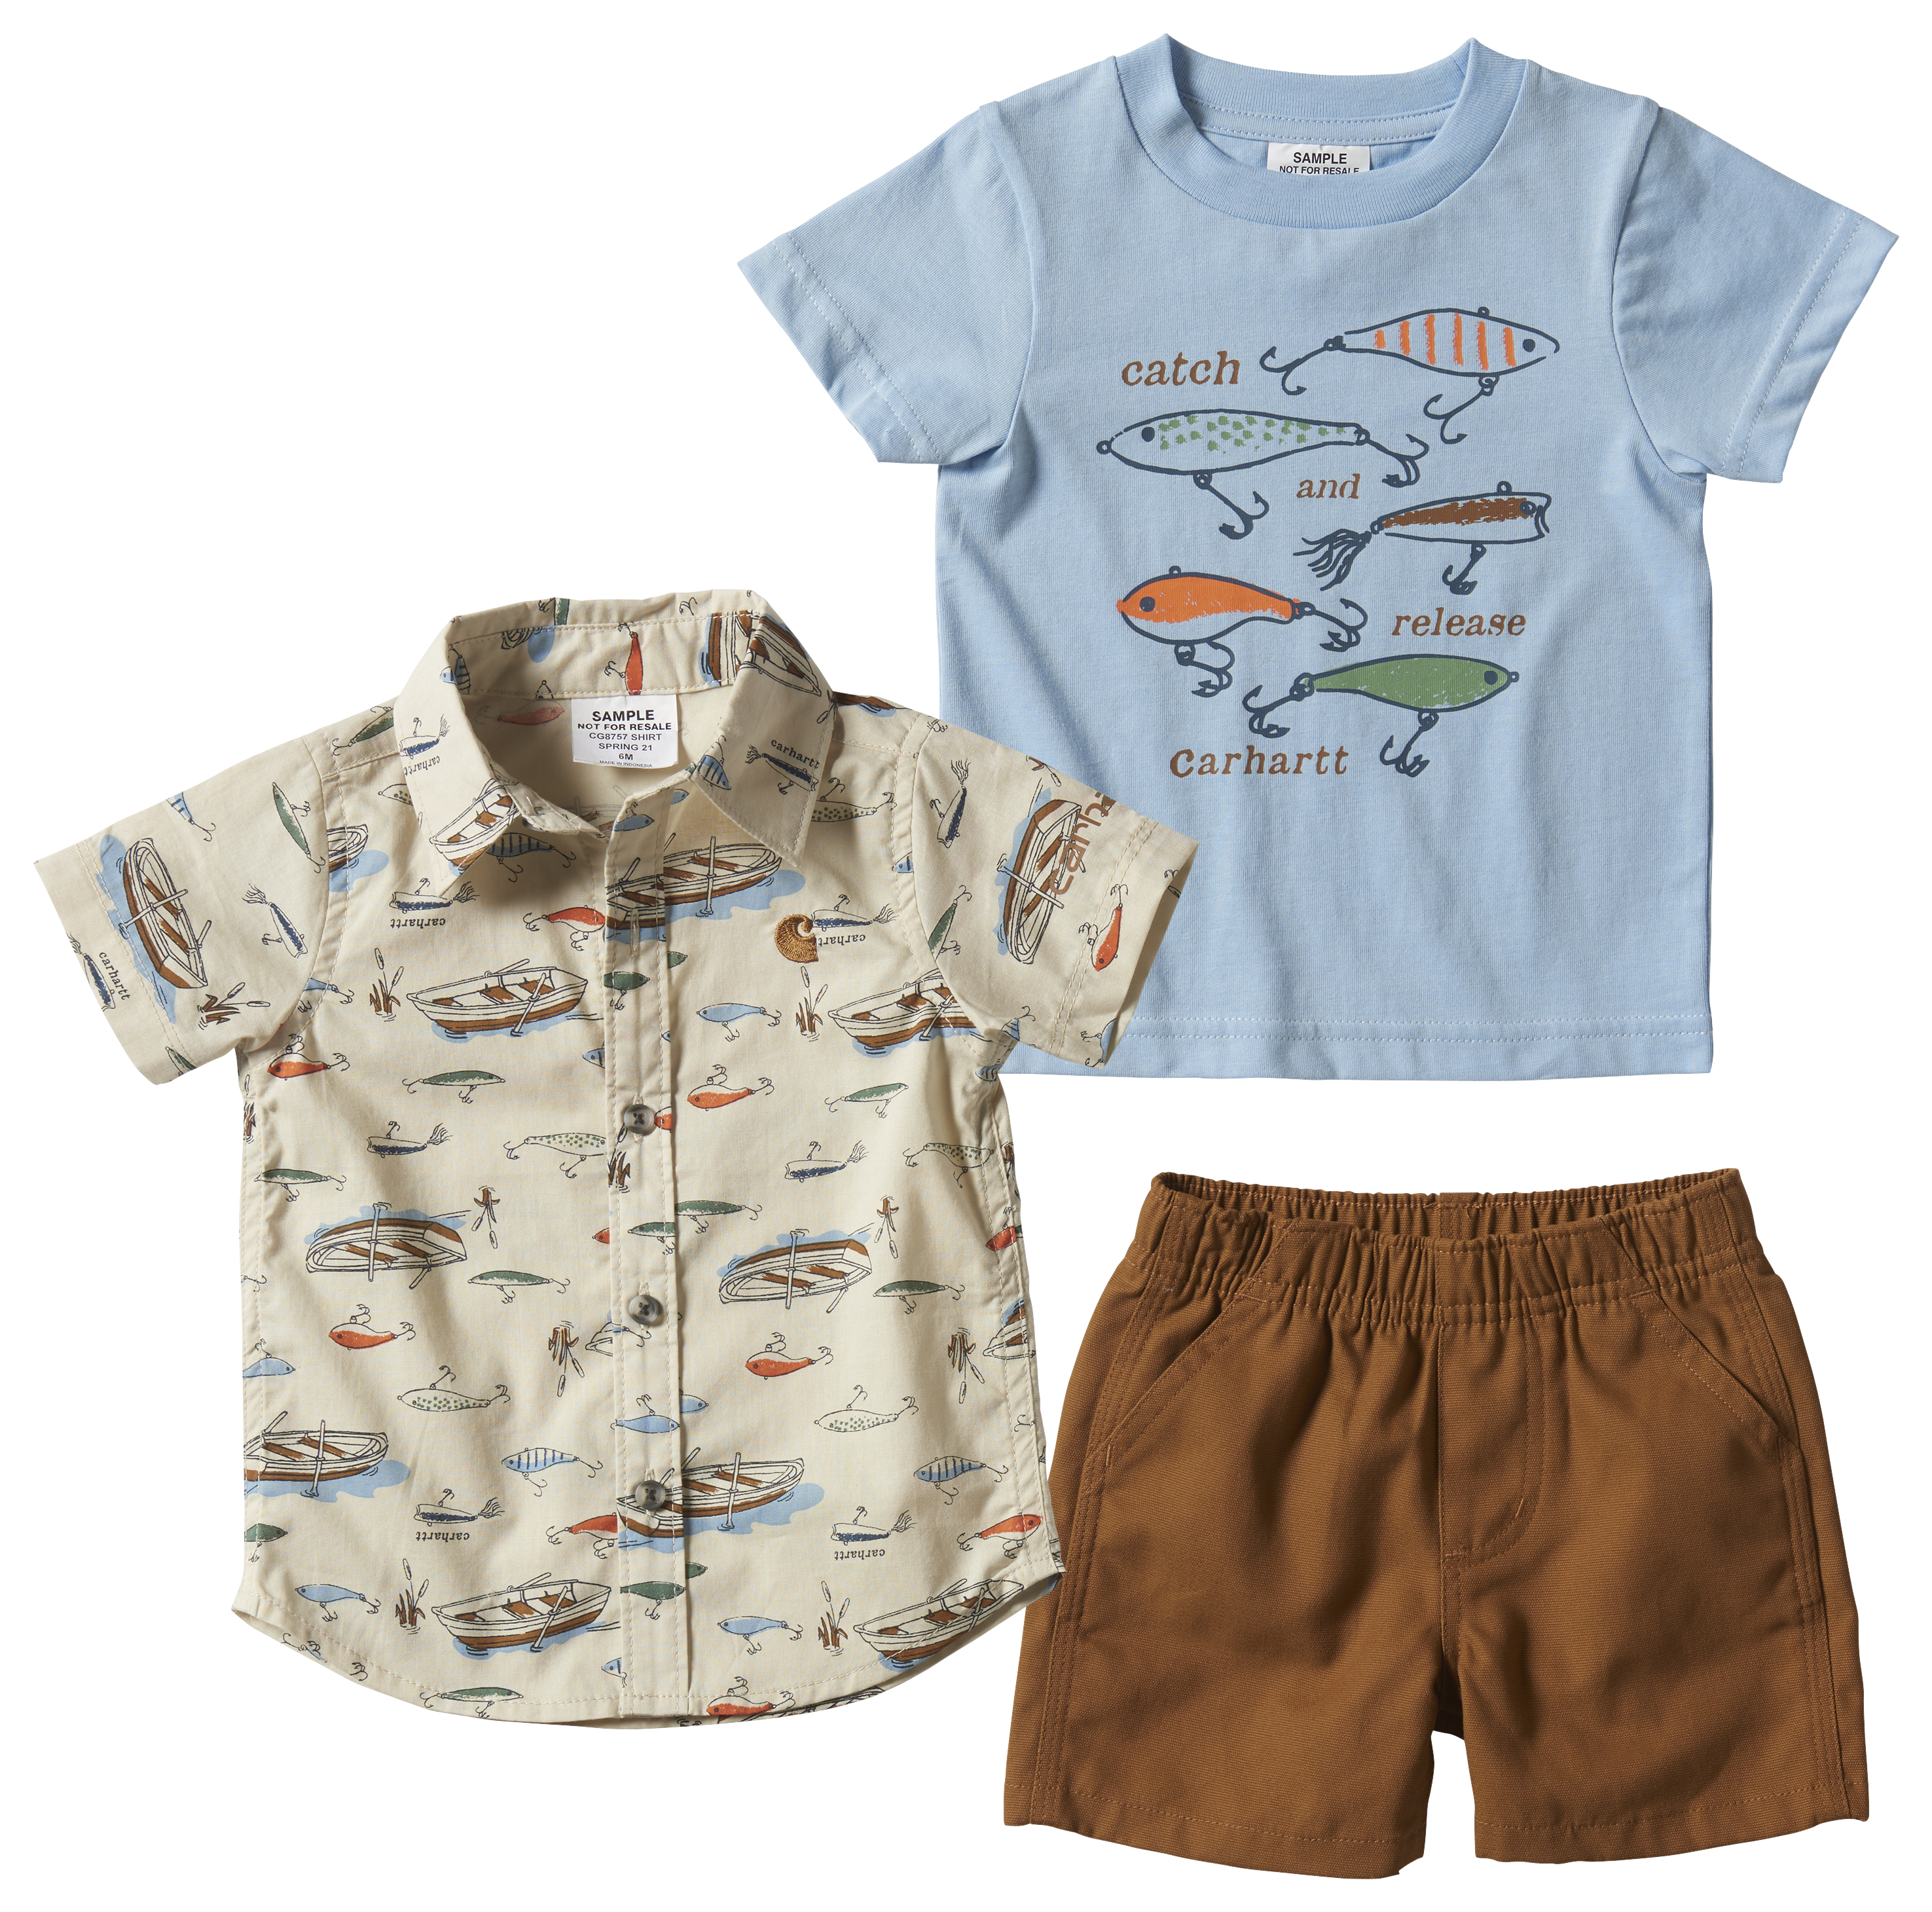 Carhartt Button-Down Fishing Shirt, Catch and Release T-Shirt, and